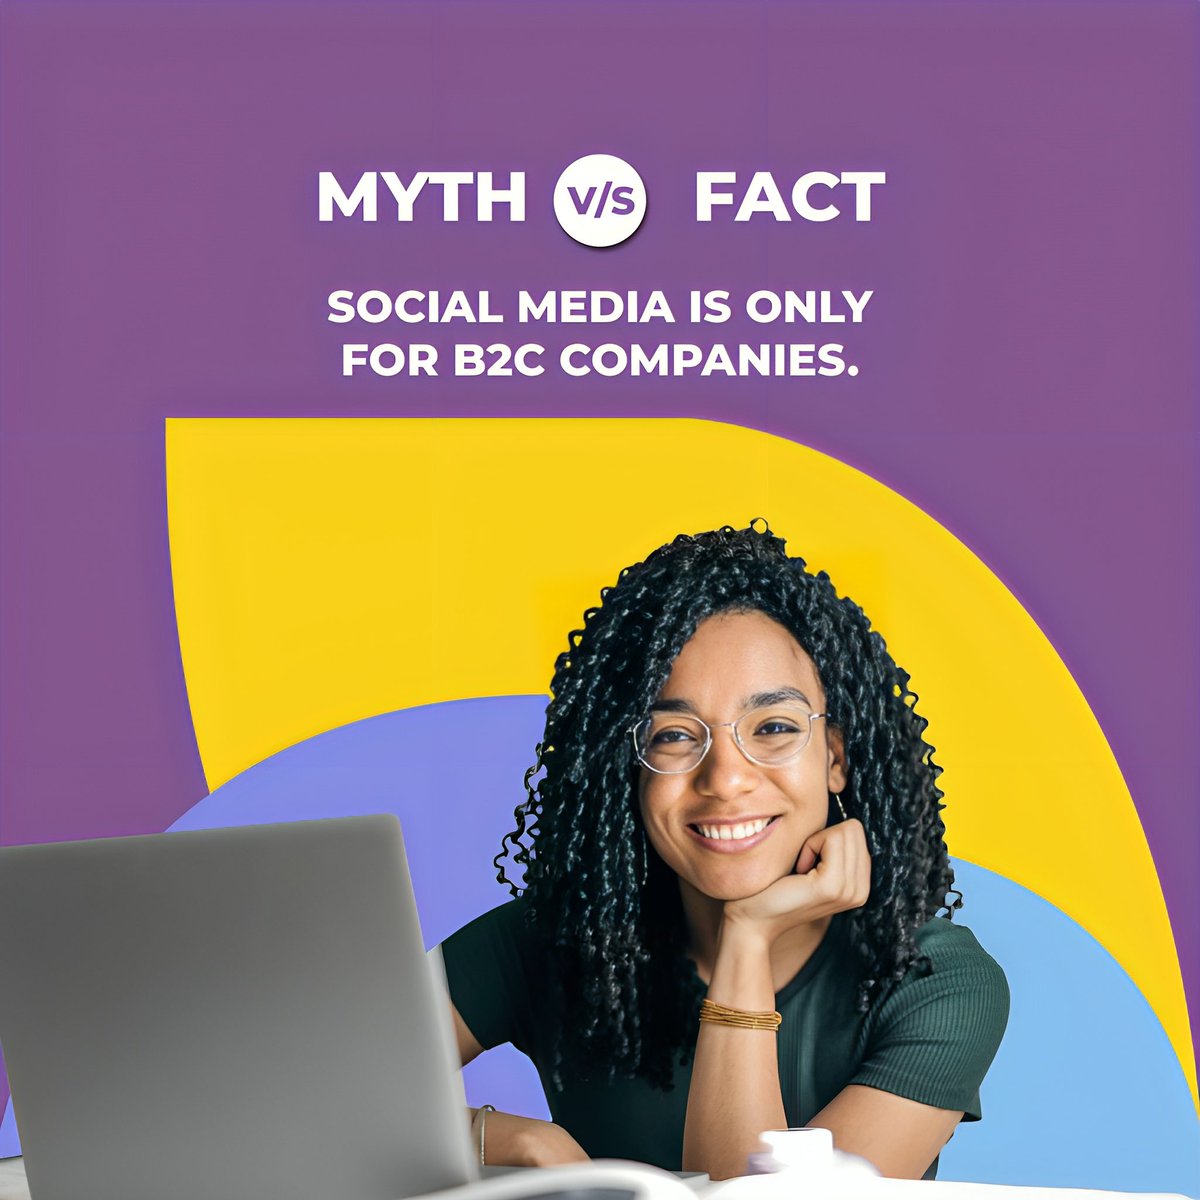 This is a…myth! Social media is a valuable tool for both B2B and B2C companies. LinkedIn, Twitter, and Instagram all serve different roles for B2B networking and lead generation. 

Are you using social media for your B2B company? 

#MarketingTools #SocialMediaMarketing #OBCIDO